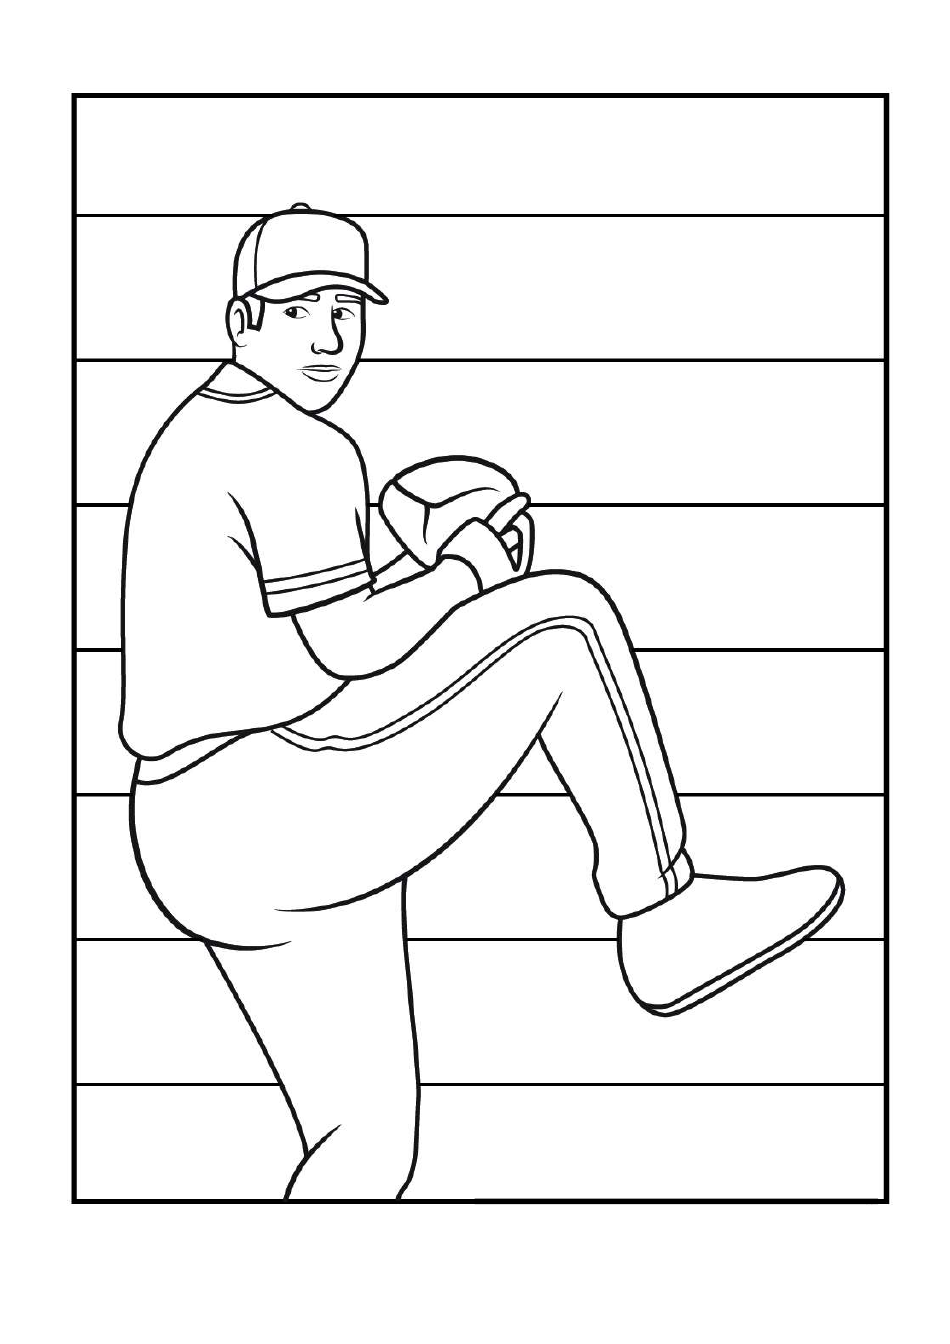 baseball coloring page featuring a man